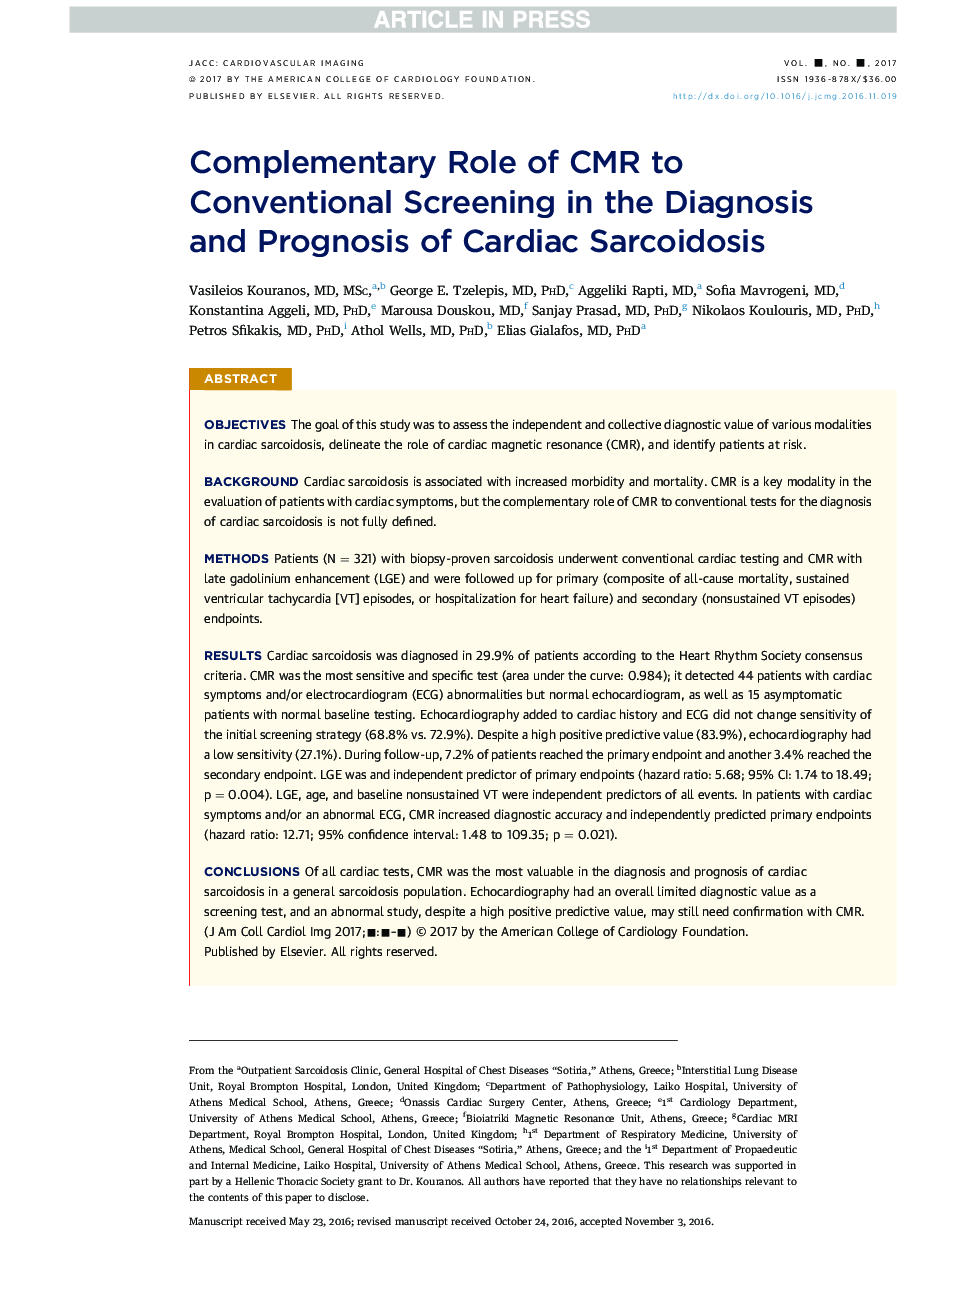 Complementary Role of CMR to Conventional Screening in the Diagnosis and Prognosis of Cardiac Sarcoidosis